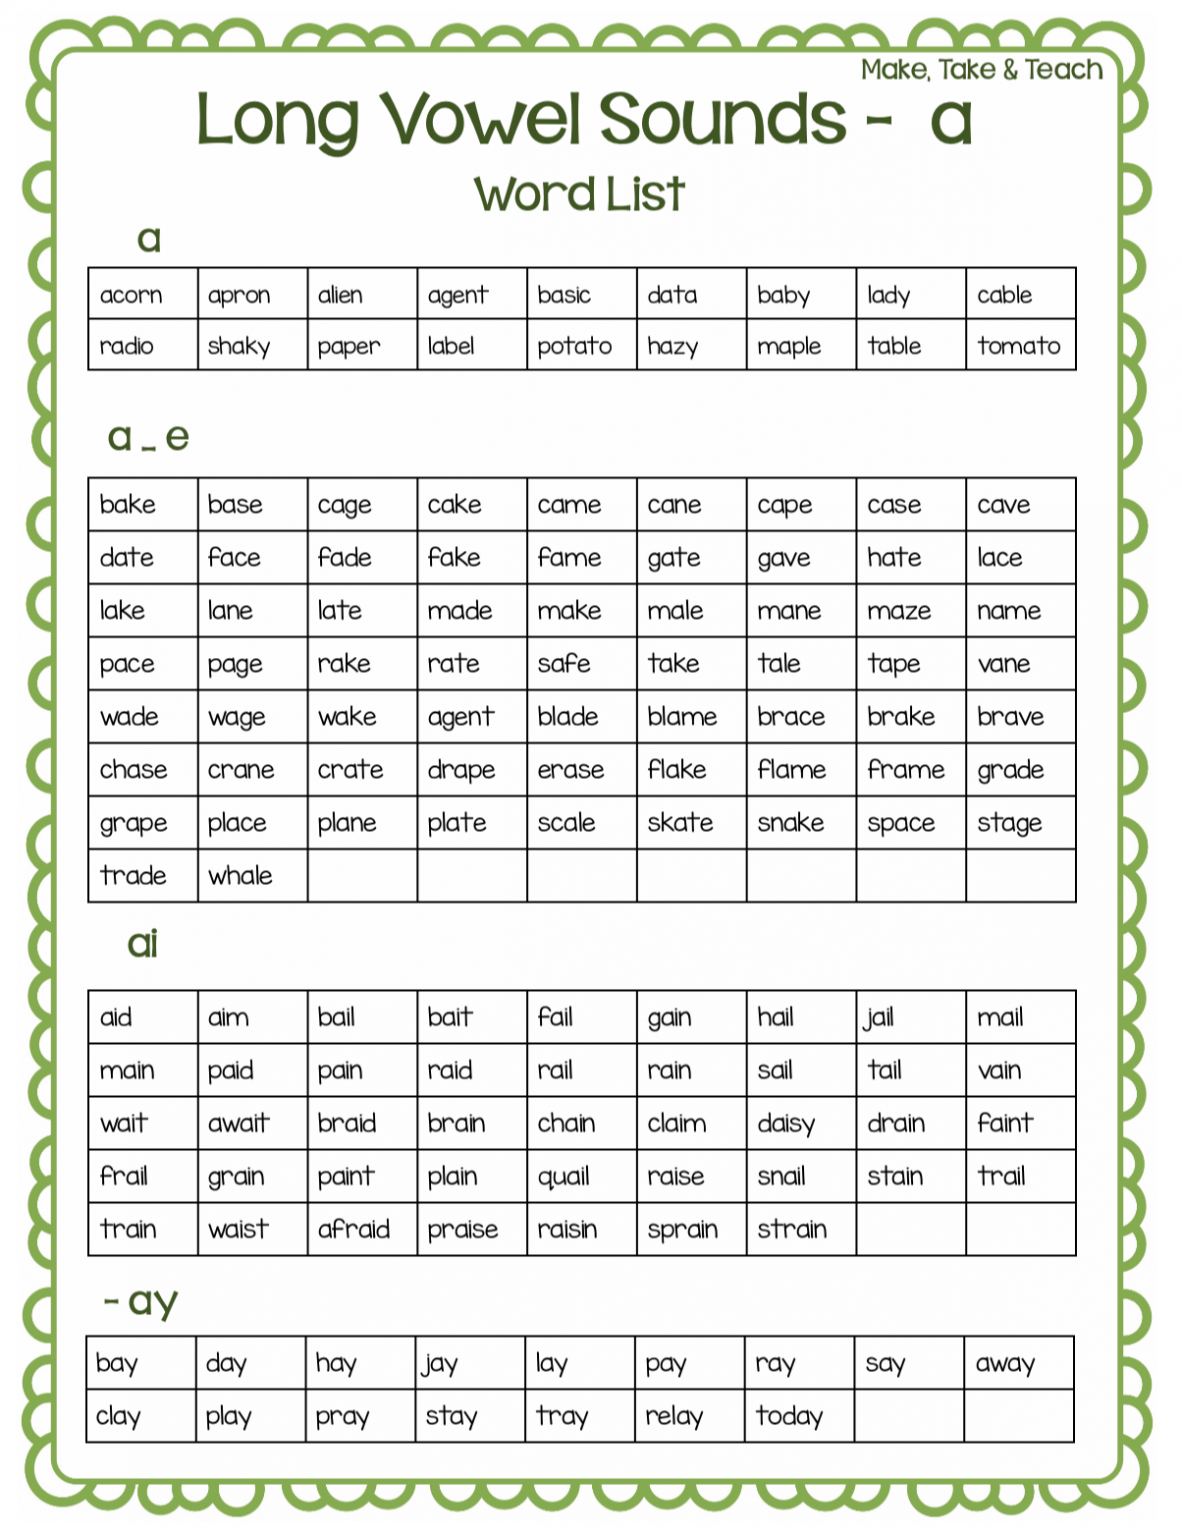 example-of-long-vowel-sounds-imagesee